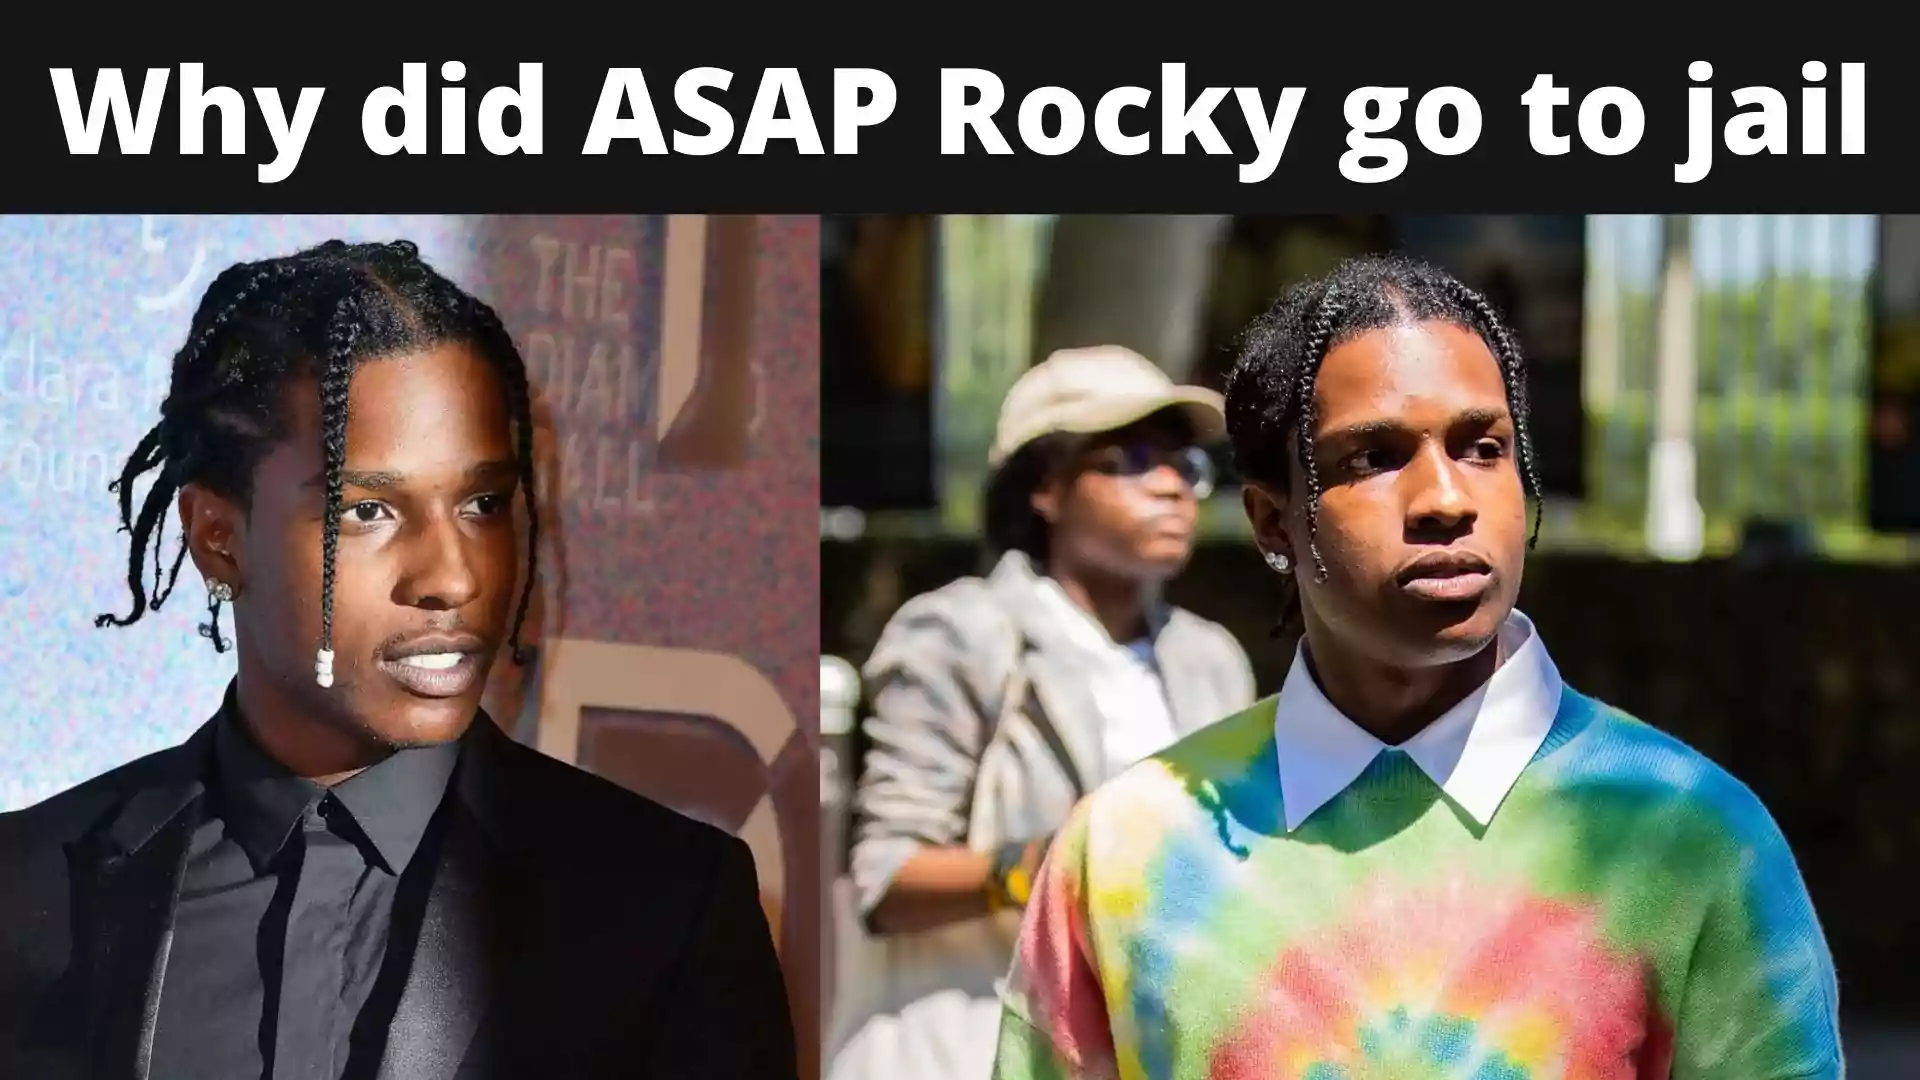 Why did ASAP Rocky go to jail wallpaper and images